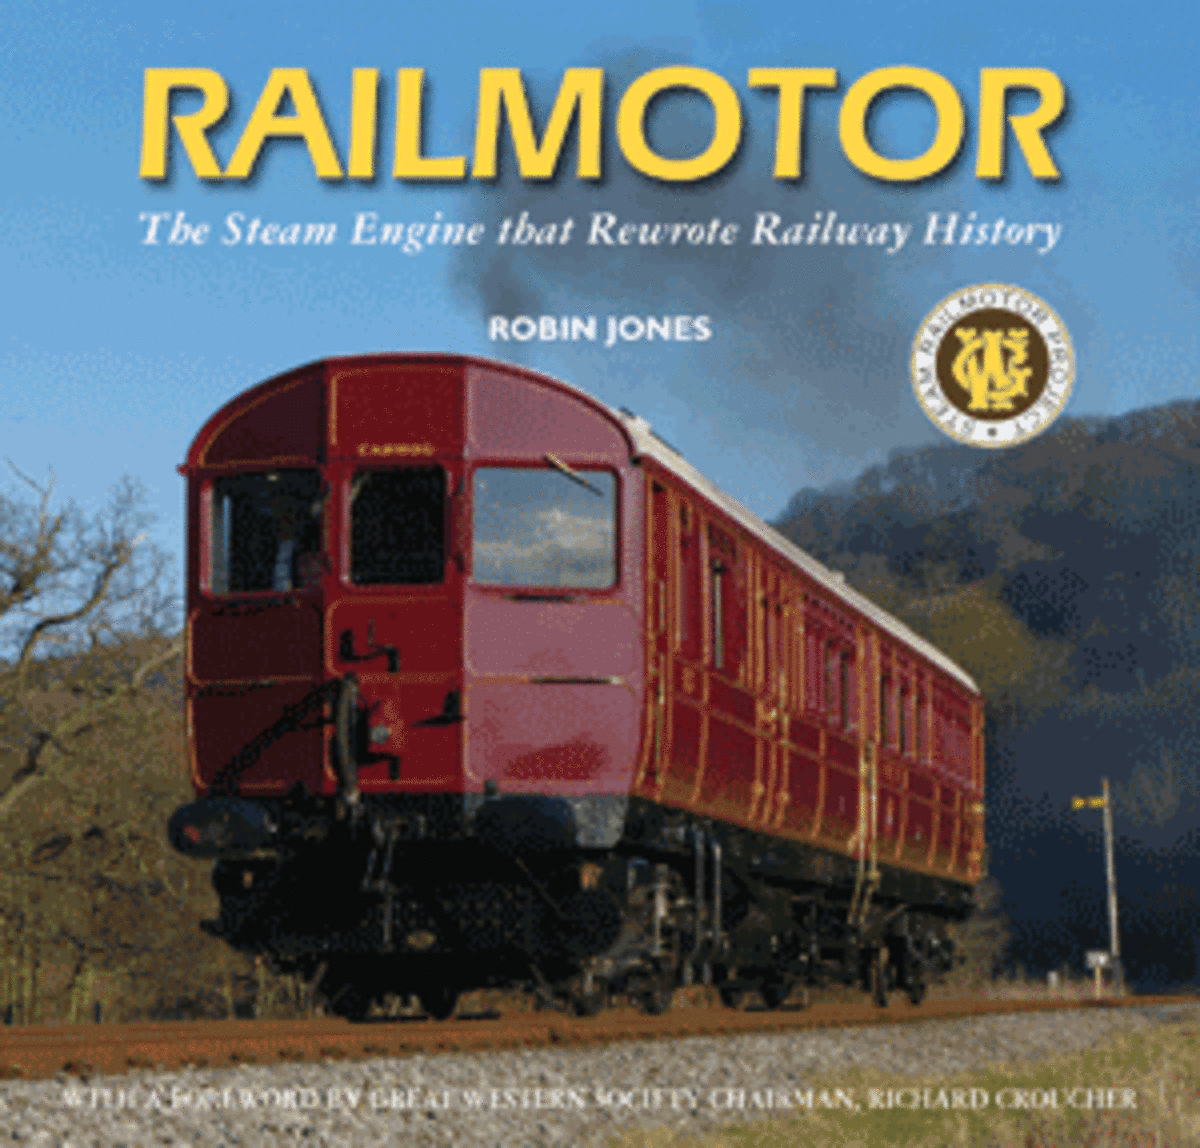 "Railmotor" features vehicles from many railways, UK and US mainly, with detailed accounts of their development. Available also through Amazon UK 